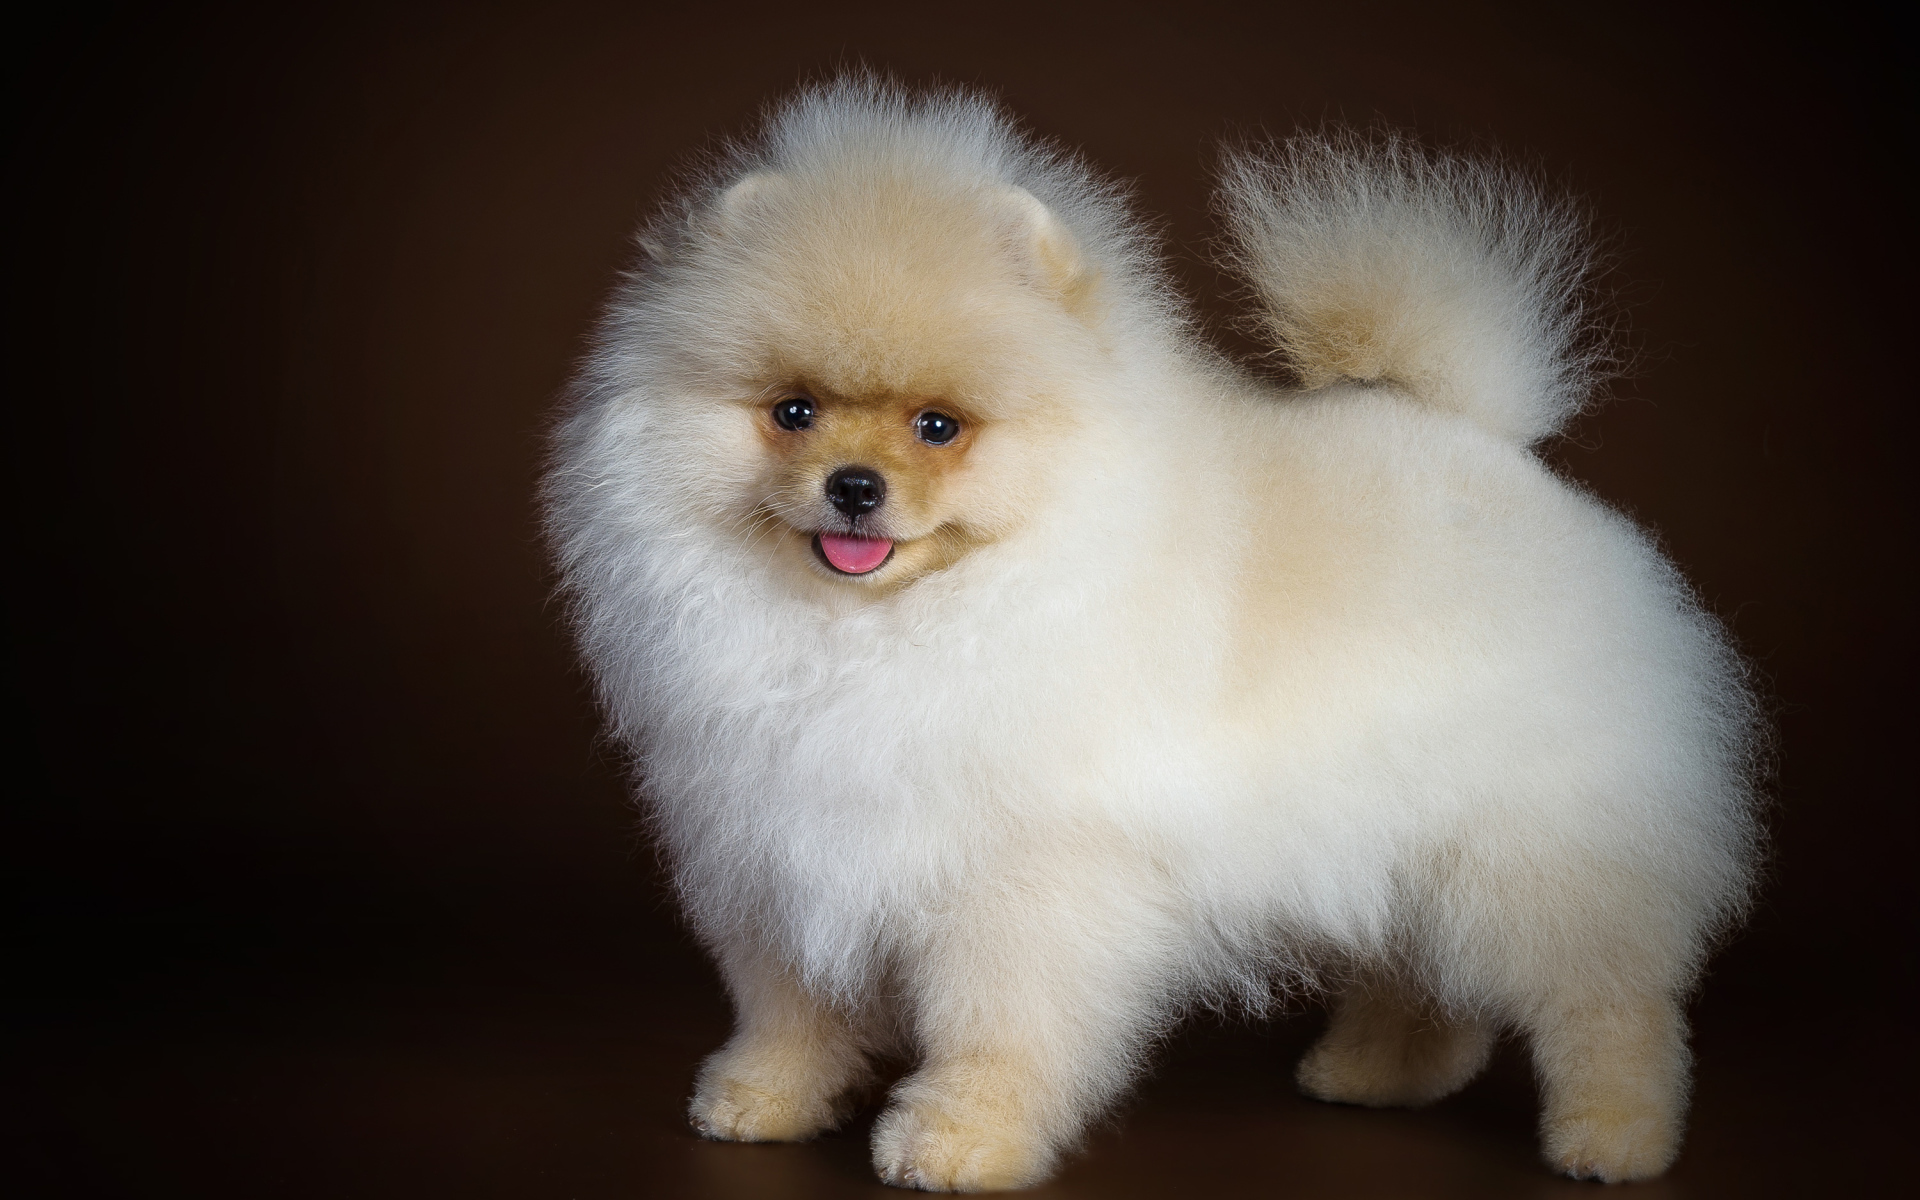 Fluffy white spitz with tongue hanging out